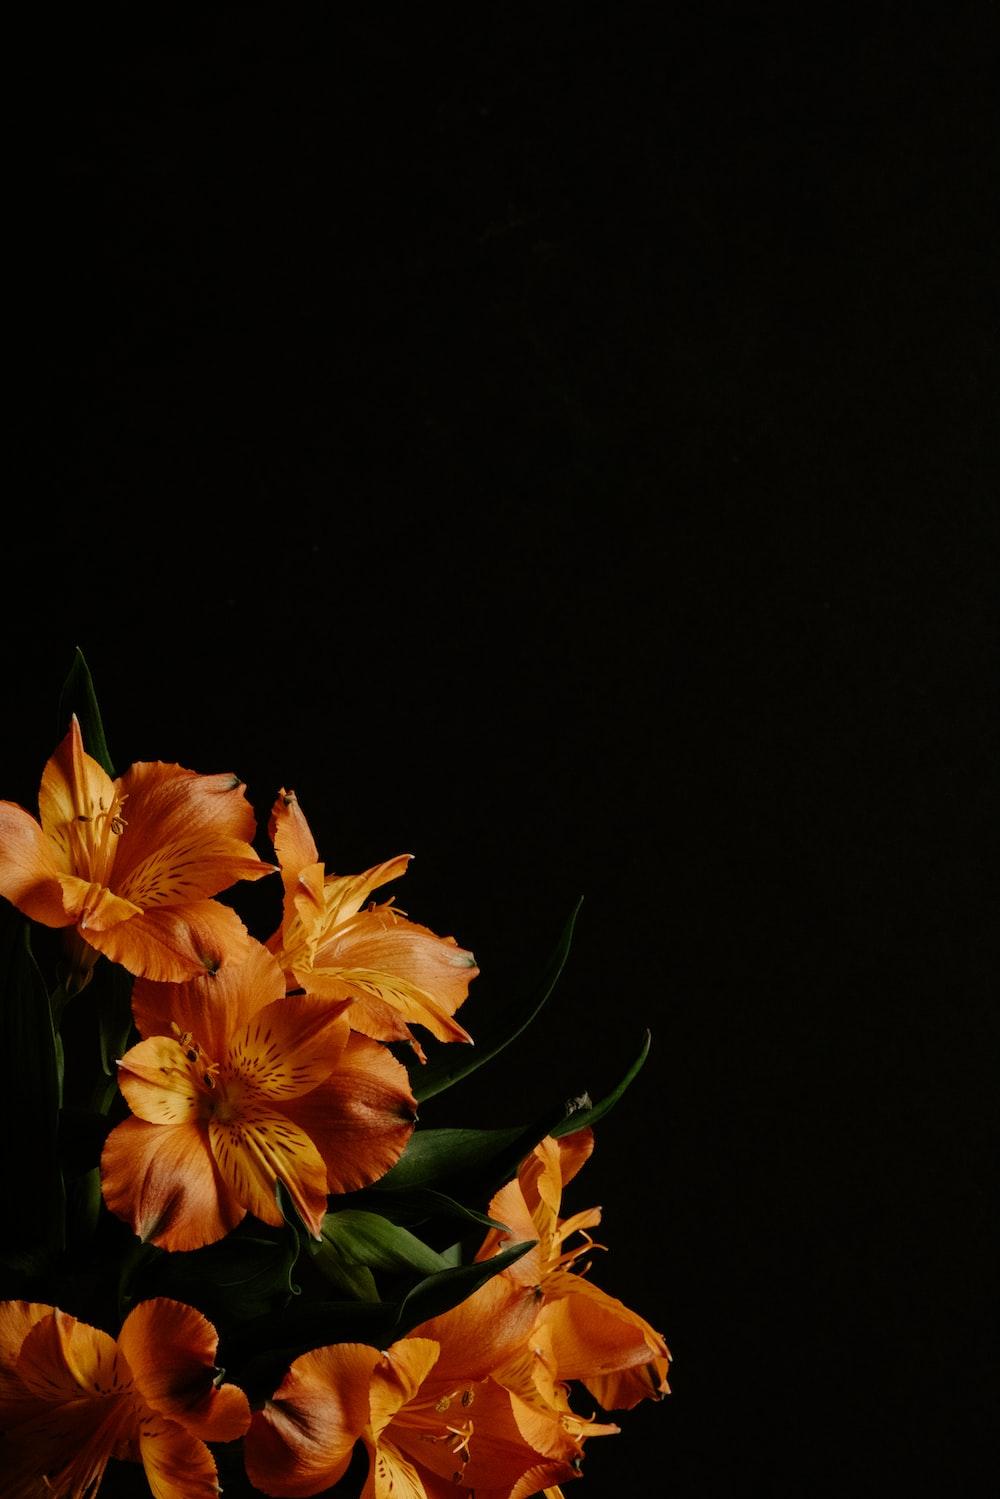 A vase filled with orange flowers on top of a table photo Free